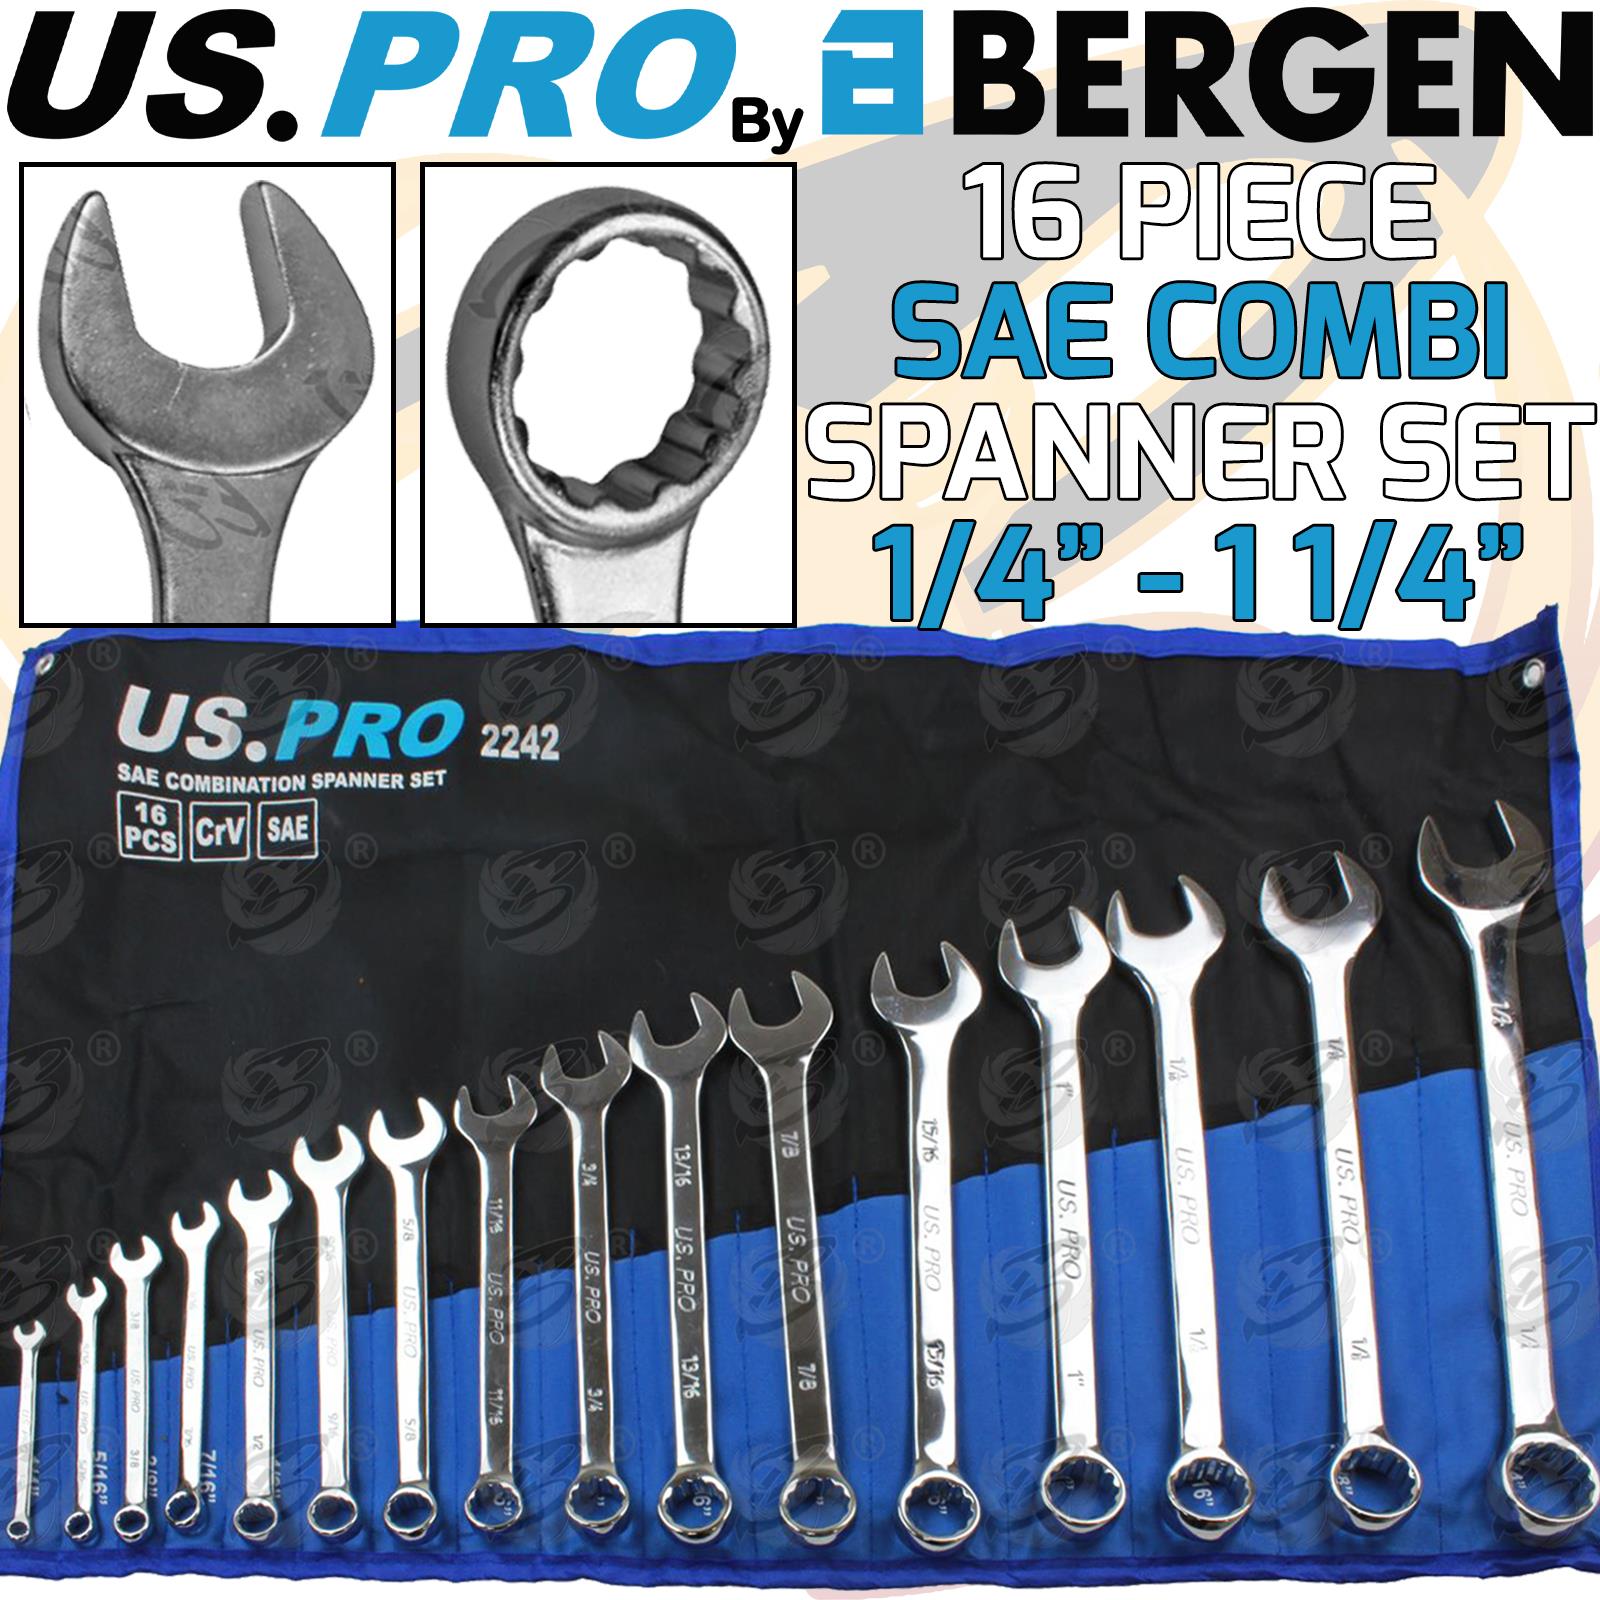 US PRO 16PCS SAE COMBINATIONS SPANNERS 1/4" - 1 1/4"